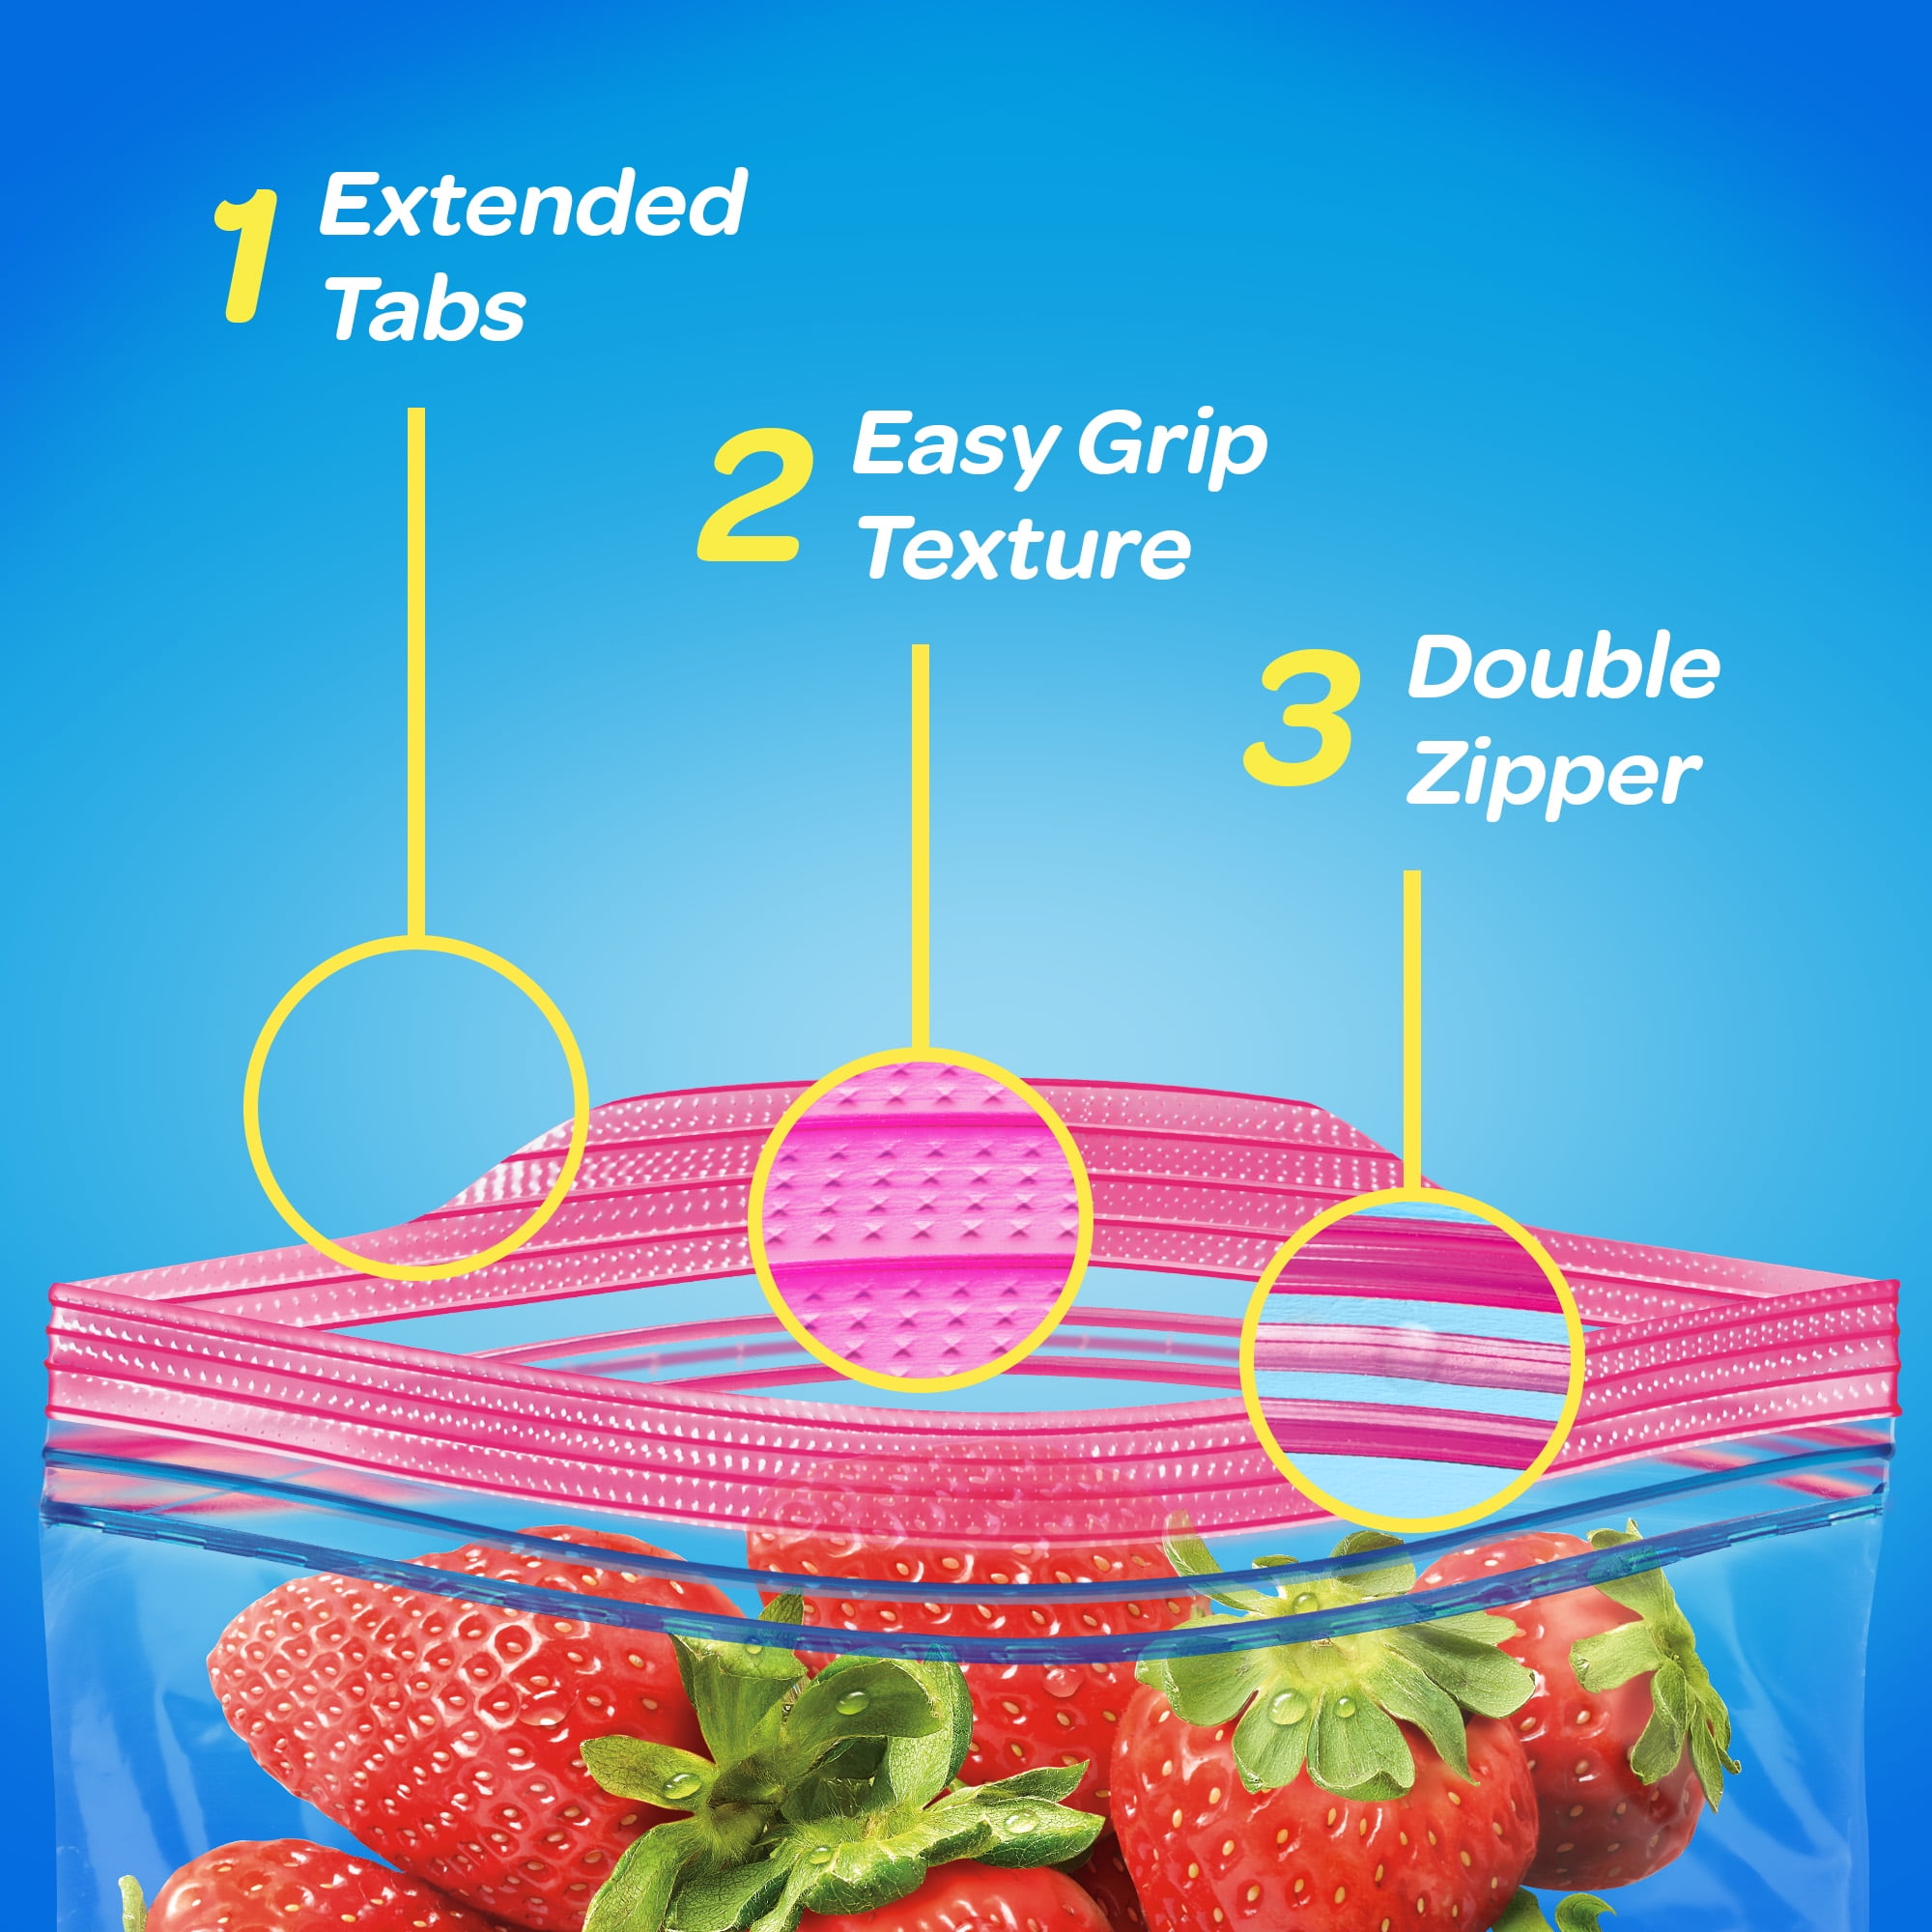 Ziploc Storage Gallon Bags With Grip 'n Seal Technology - 75ct